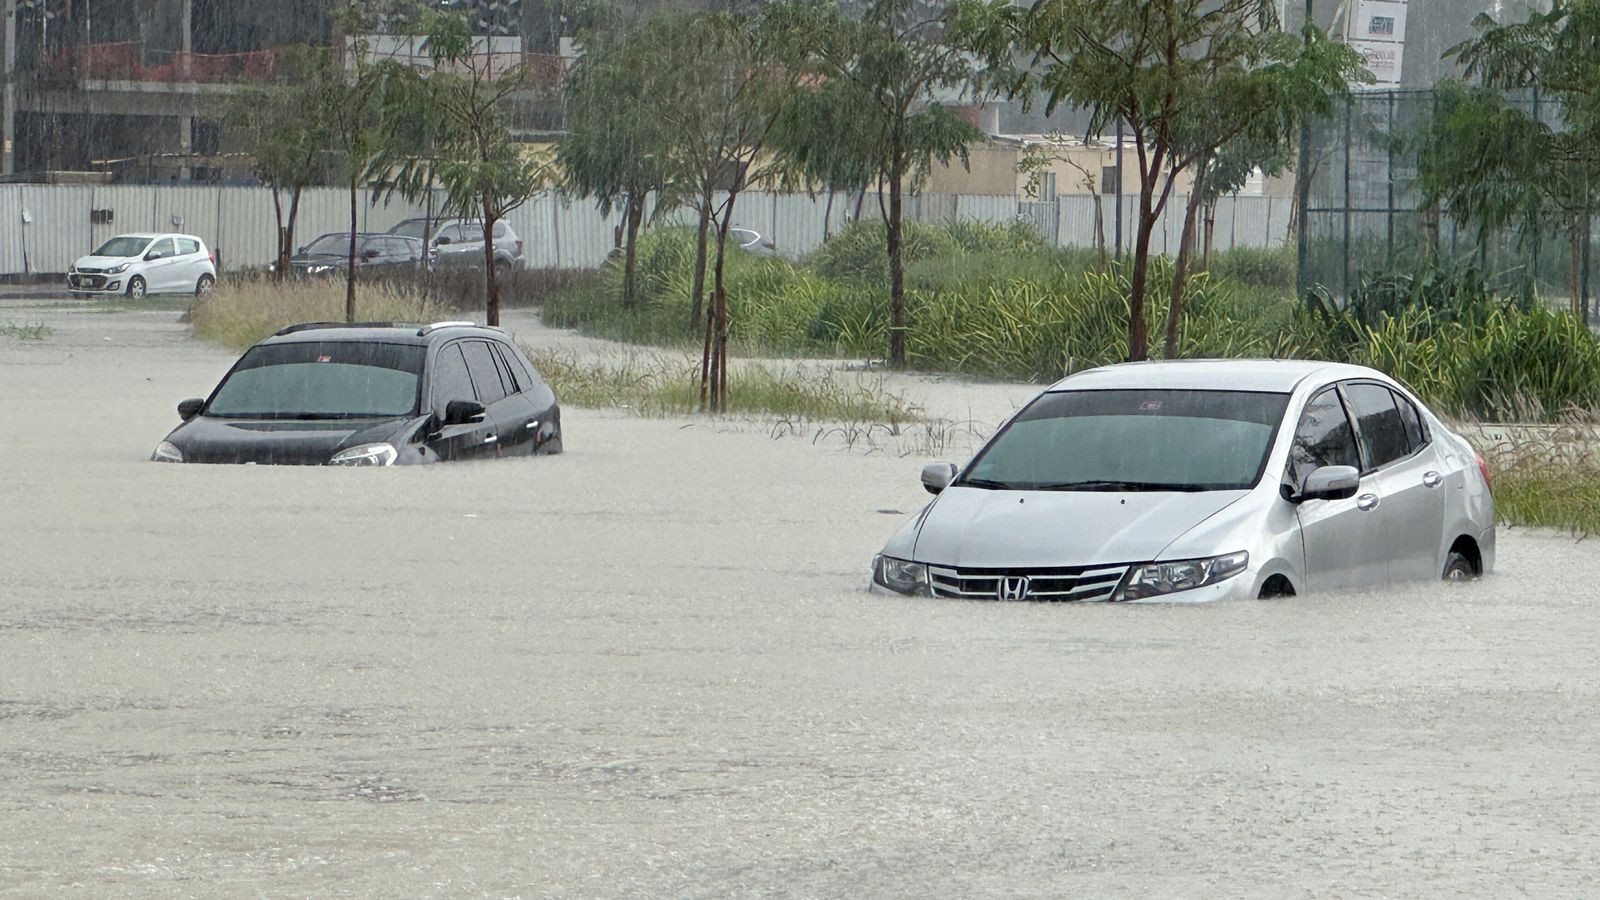 Dubai homes and roads flooded and airport tarmac looks like a lake as city-state struck by year's rainfall in a day